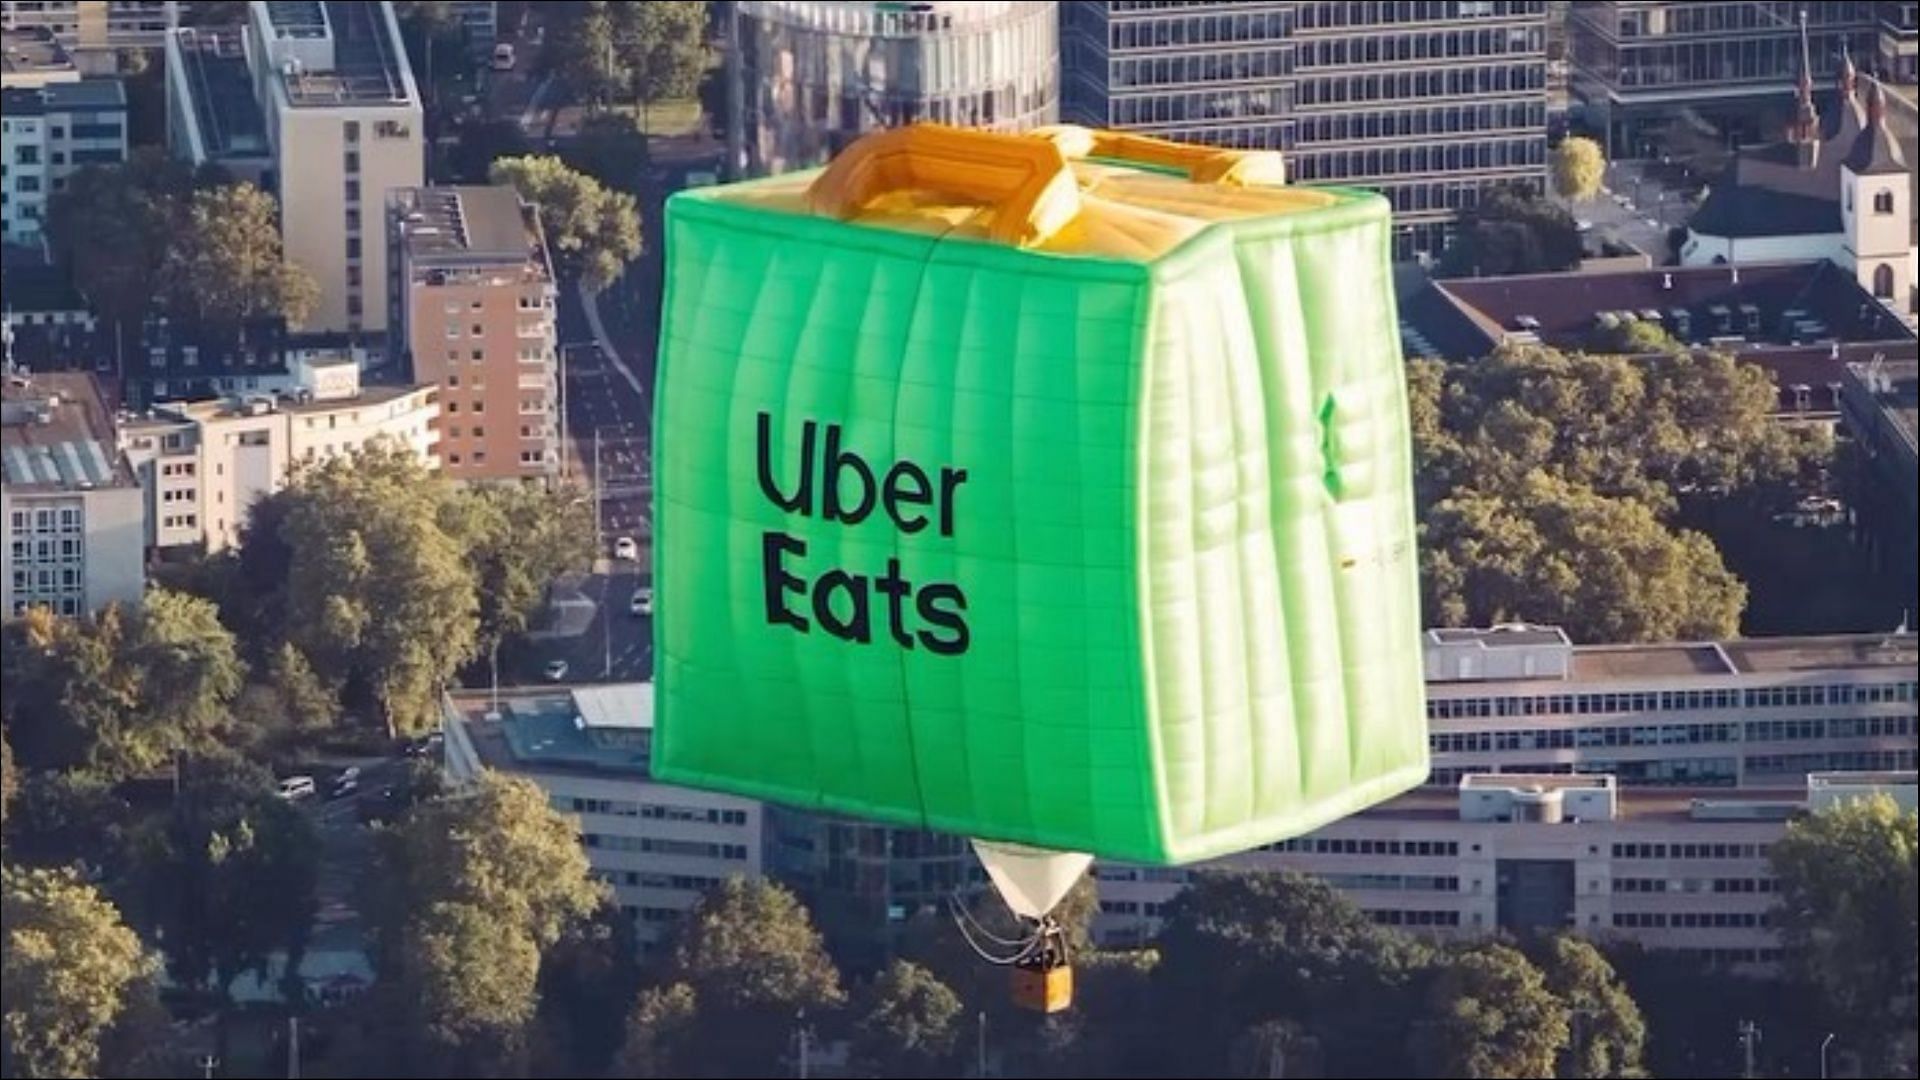 Uber Eats announces that it will start accepting food stamps and other flexible payment options by 2024 (Image via Uber Eats)